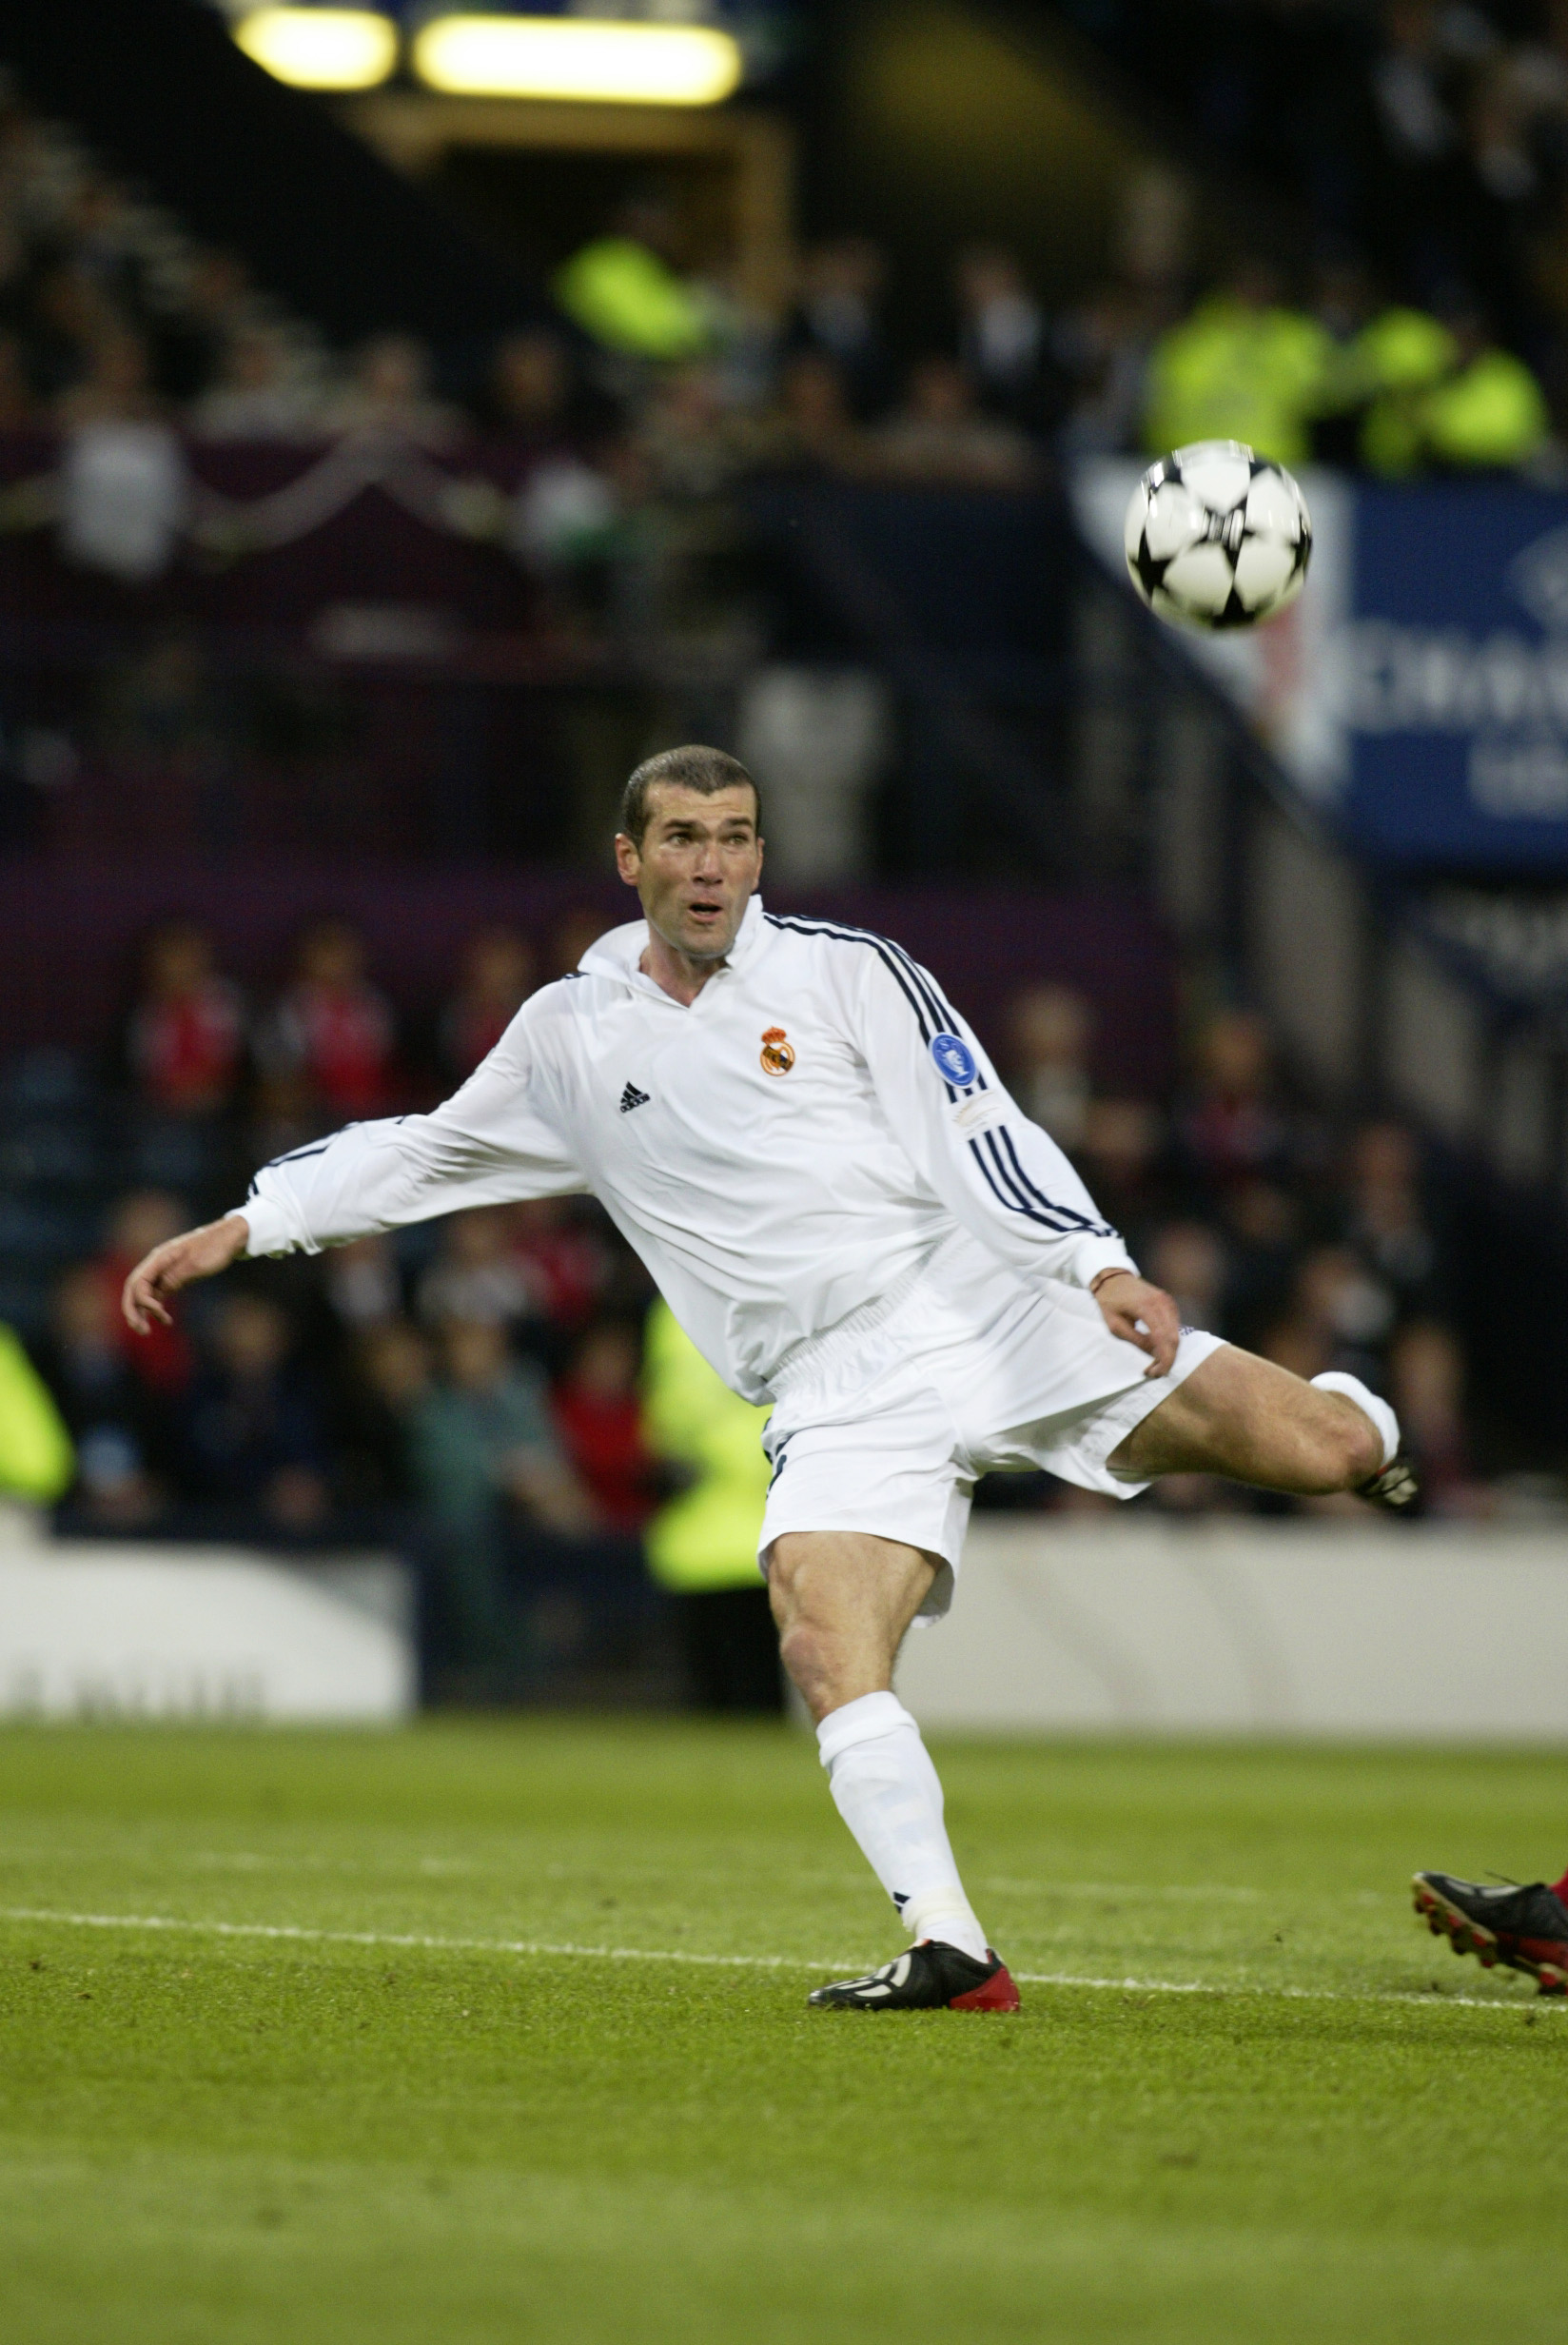 Zinedine Zidane shapes up to score one of the greatest Champions League goals of all time